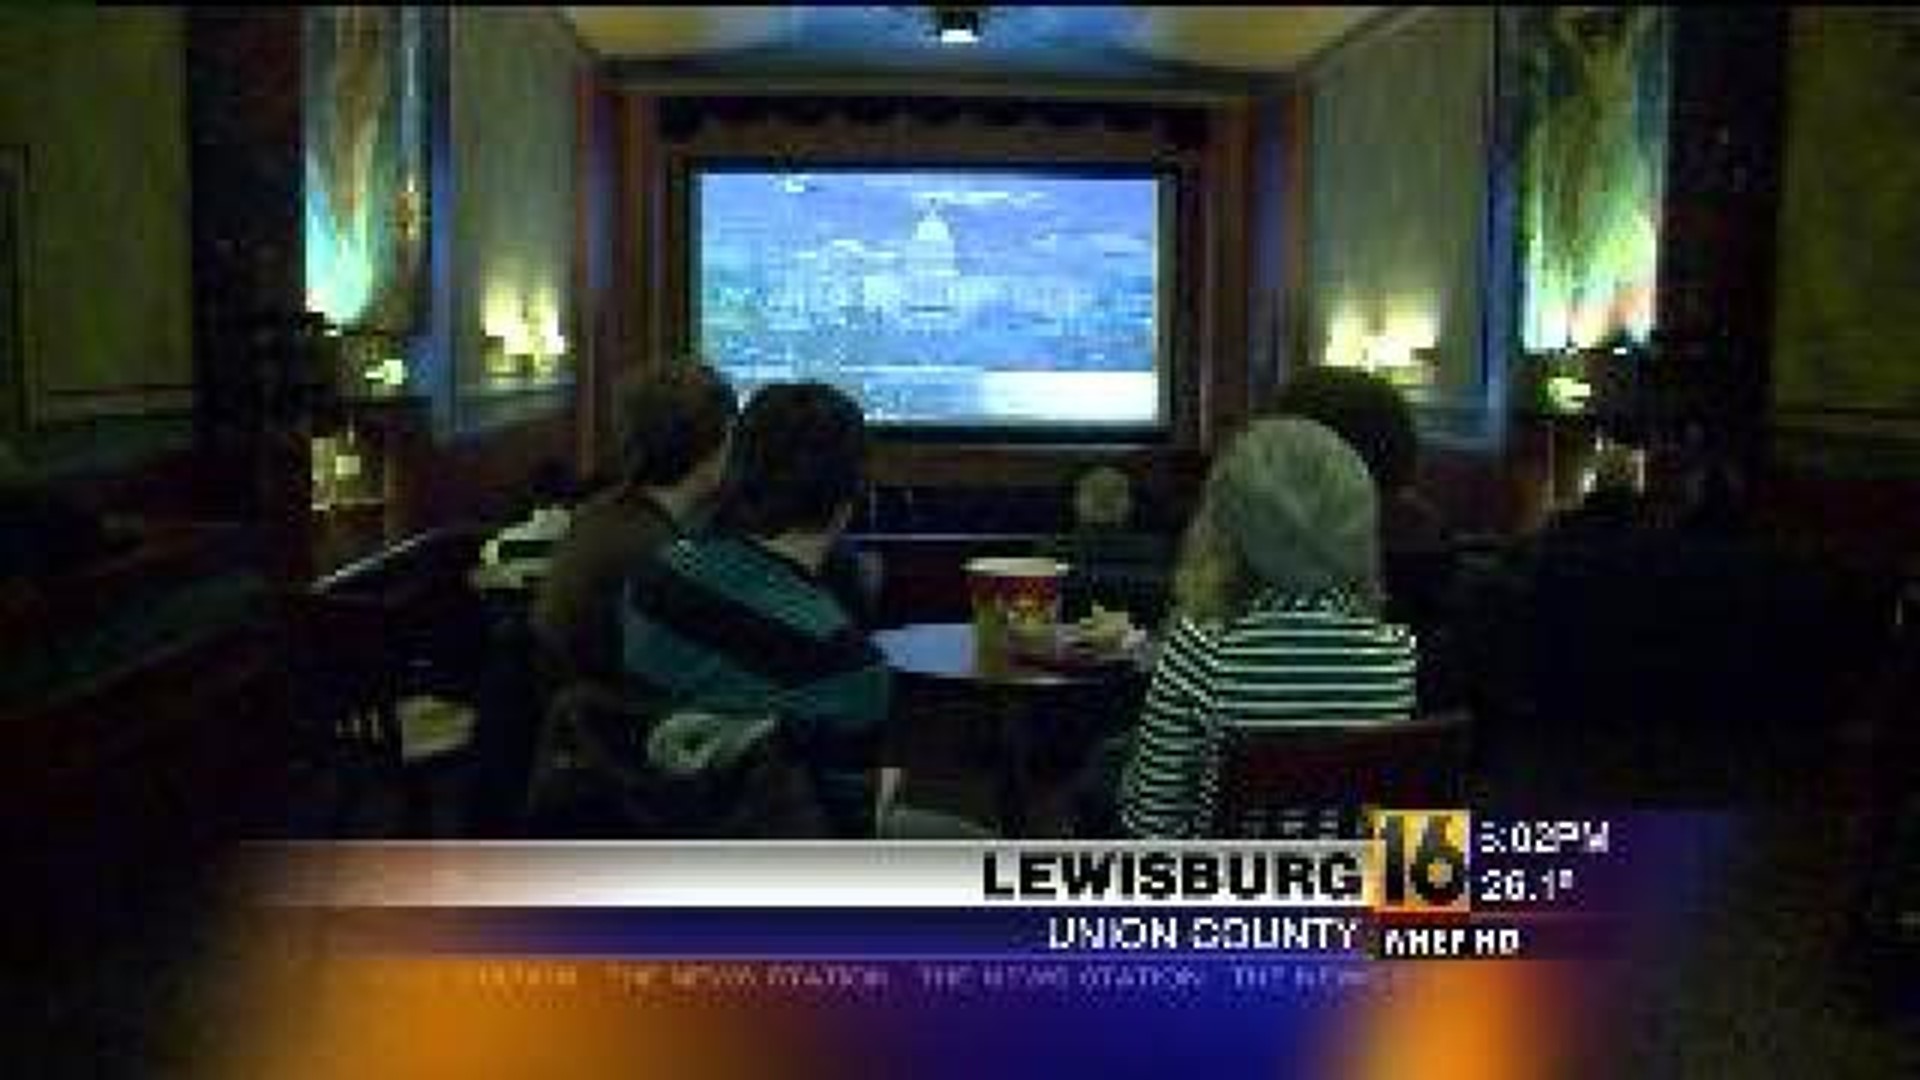 Campus Theater Shows Inauguration